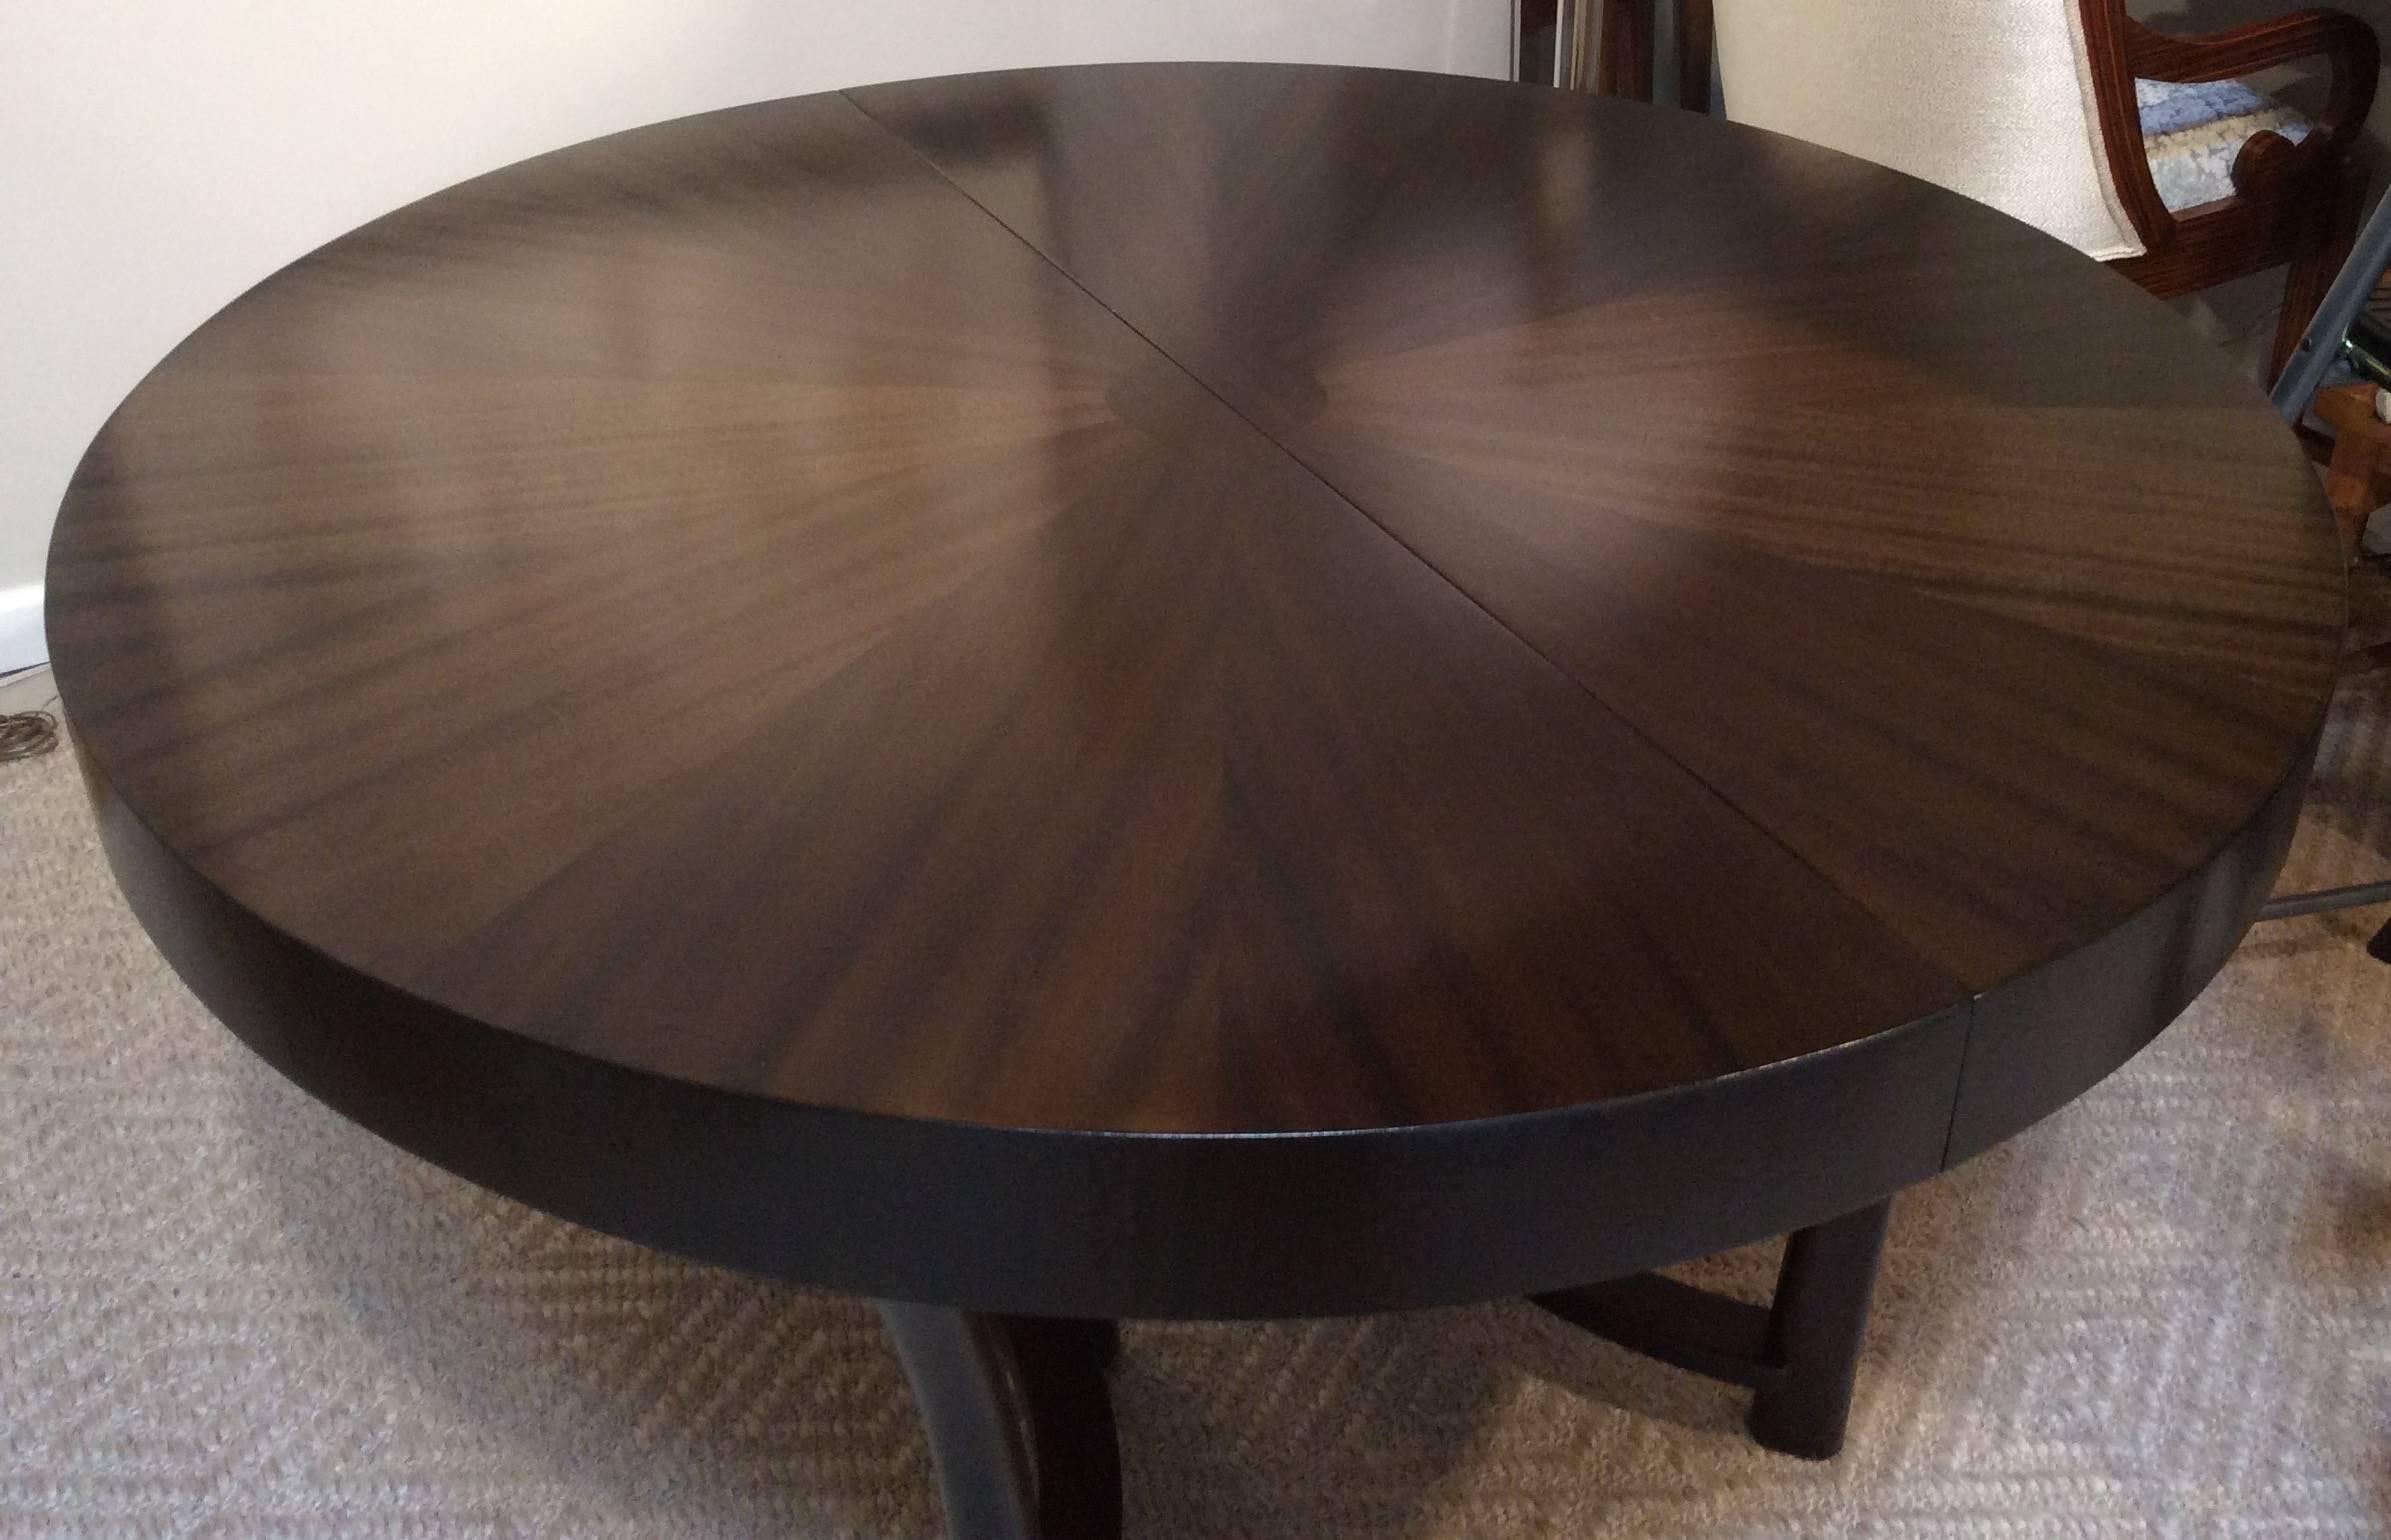 Magnificently refinished walnut dining table with unusual starburst veneer top and one extension leave. Designed by T.H. Robsjohn-Gibbings for Widdicomb, USA, circa 1940s. This table can be transformed from round to elongated oval by the additional